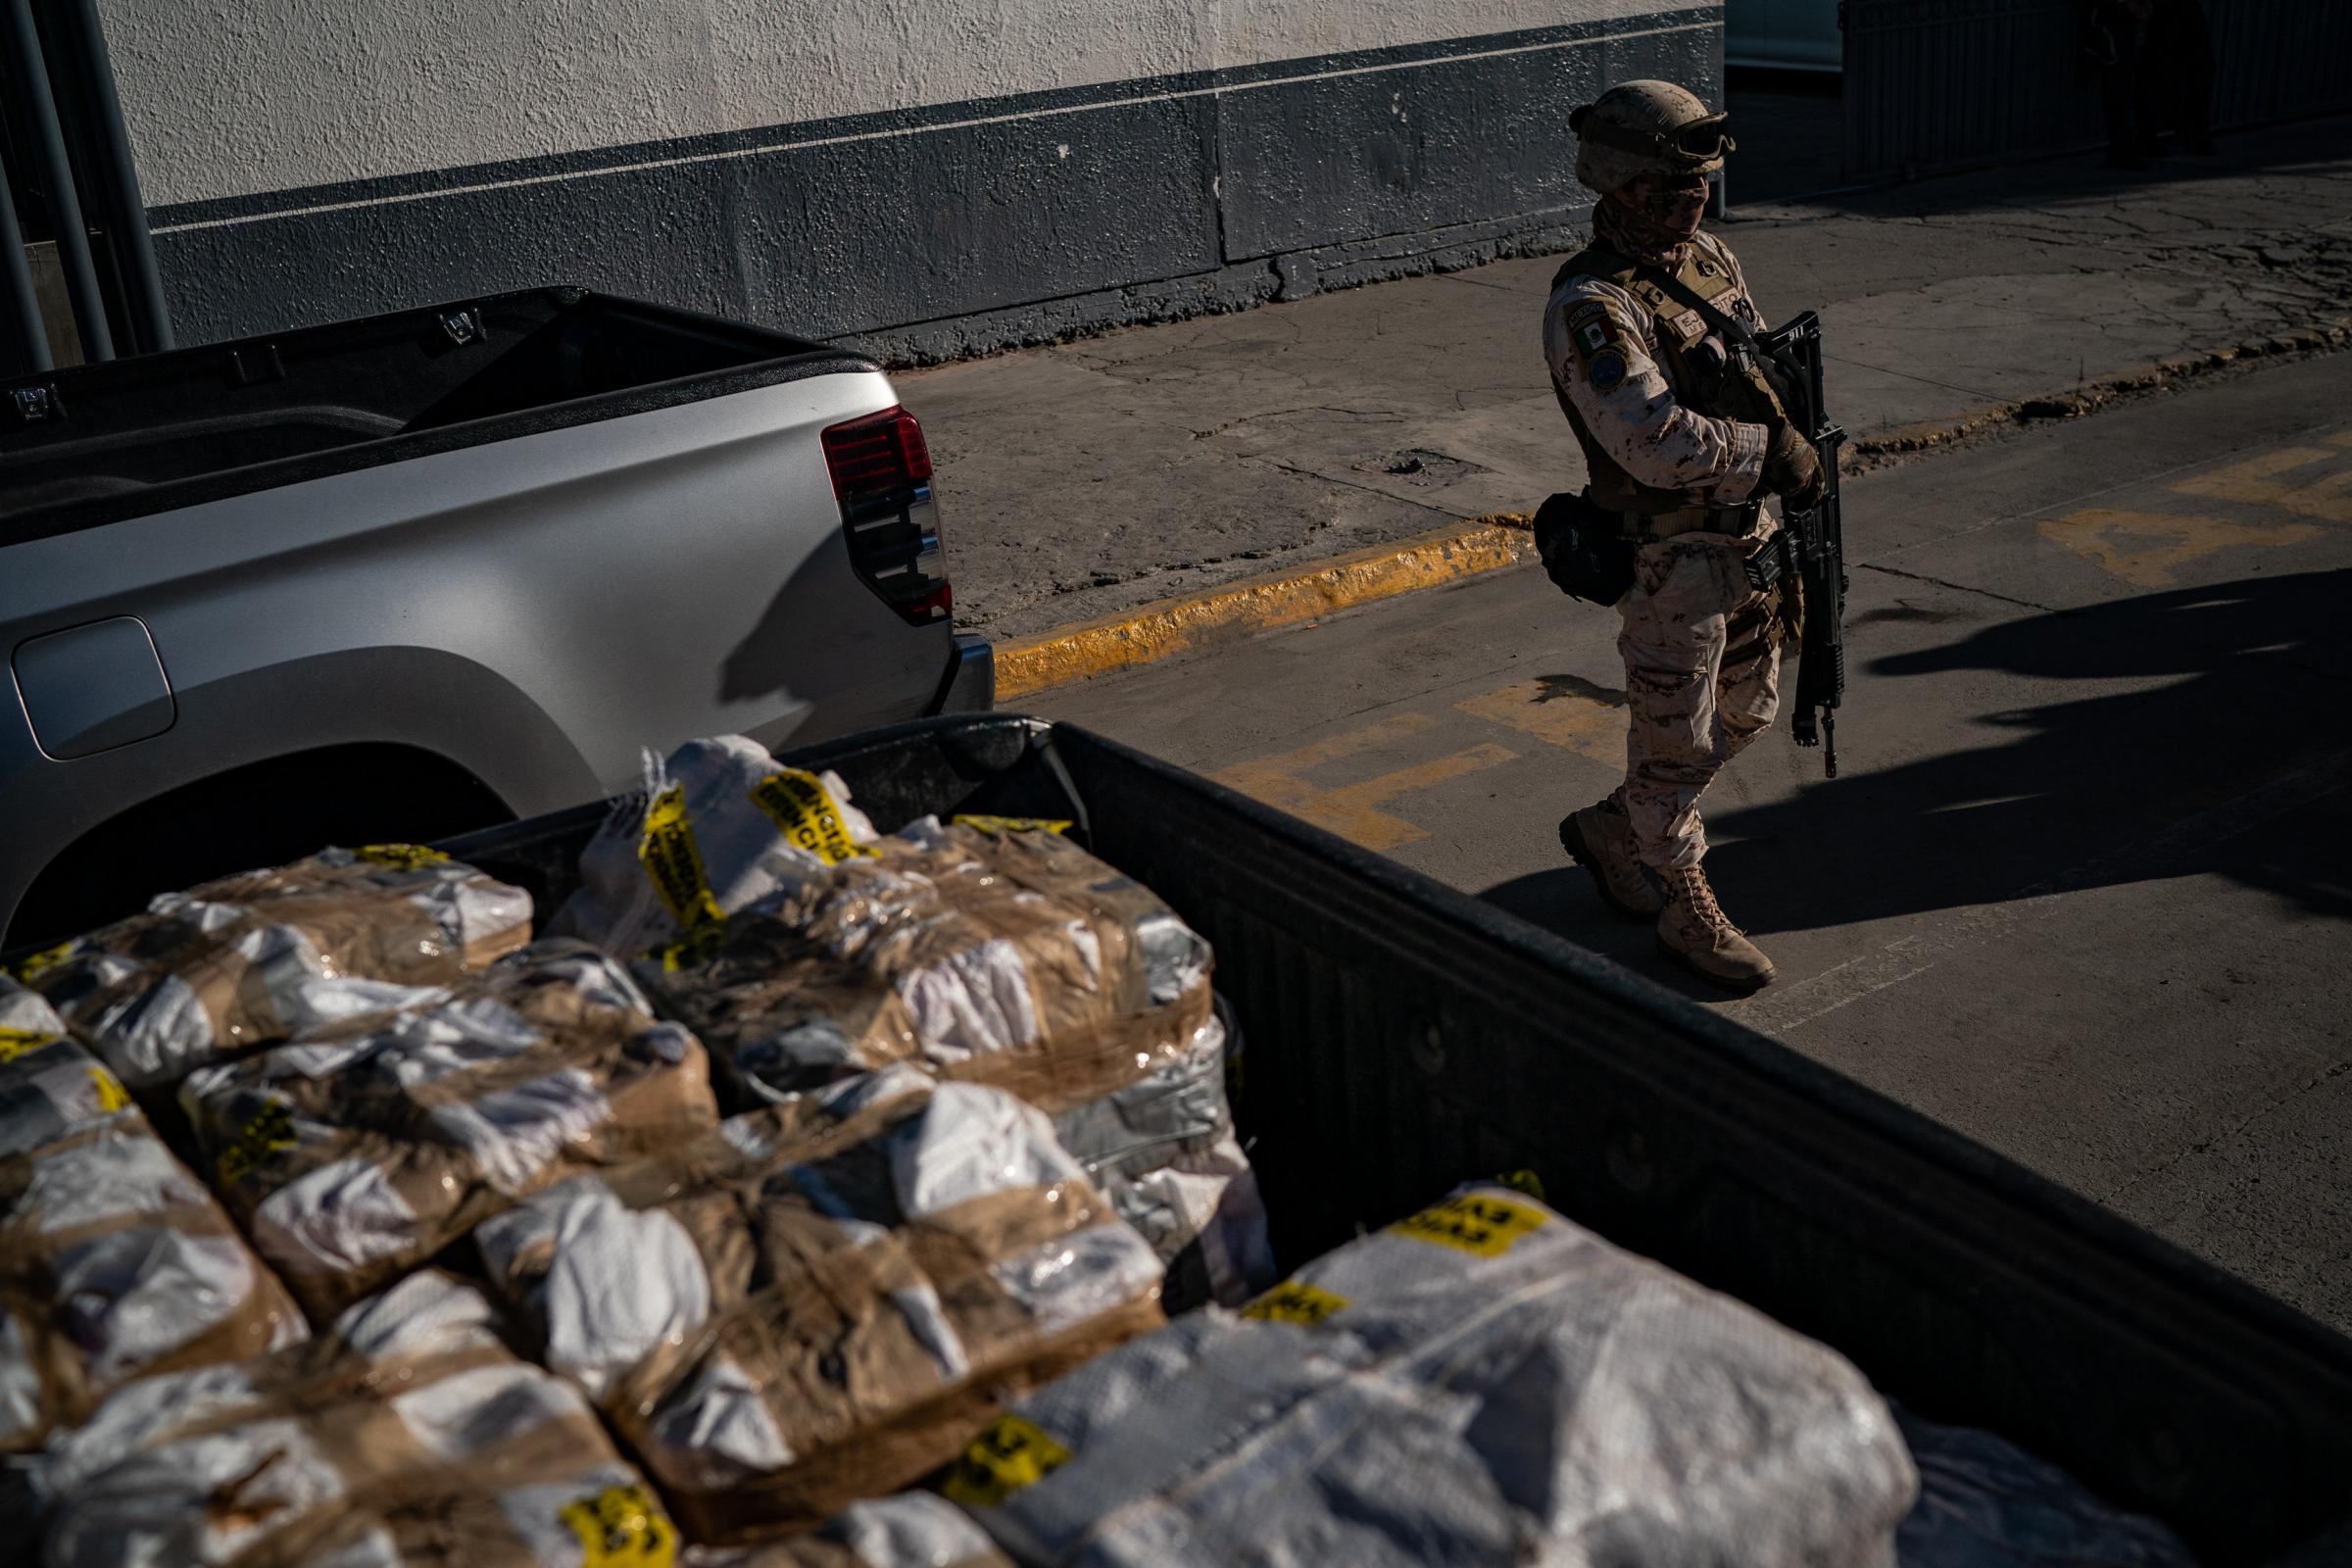 TIJUANA, MEXICO - OCTOBER 18: Hundreds of pounds of fentanyl and meth seized near Ensenada in October arrive for officials from Mexicos attorney generals office to be unloaded at their headquarter in Tijuana, Mexico, Tuesday, October 18, 2022. No one was